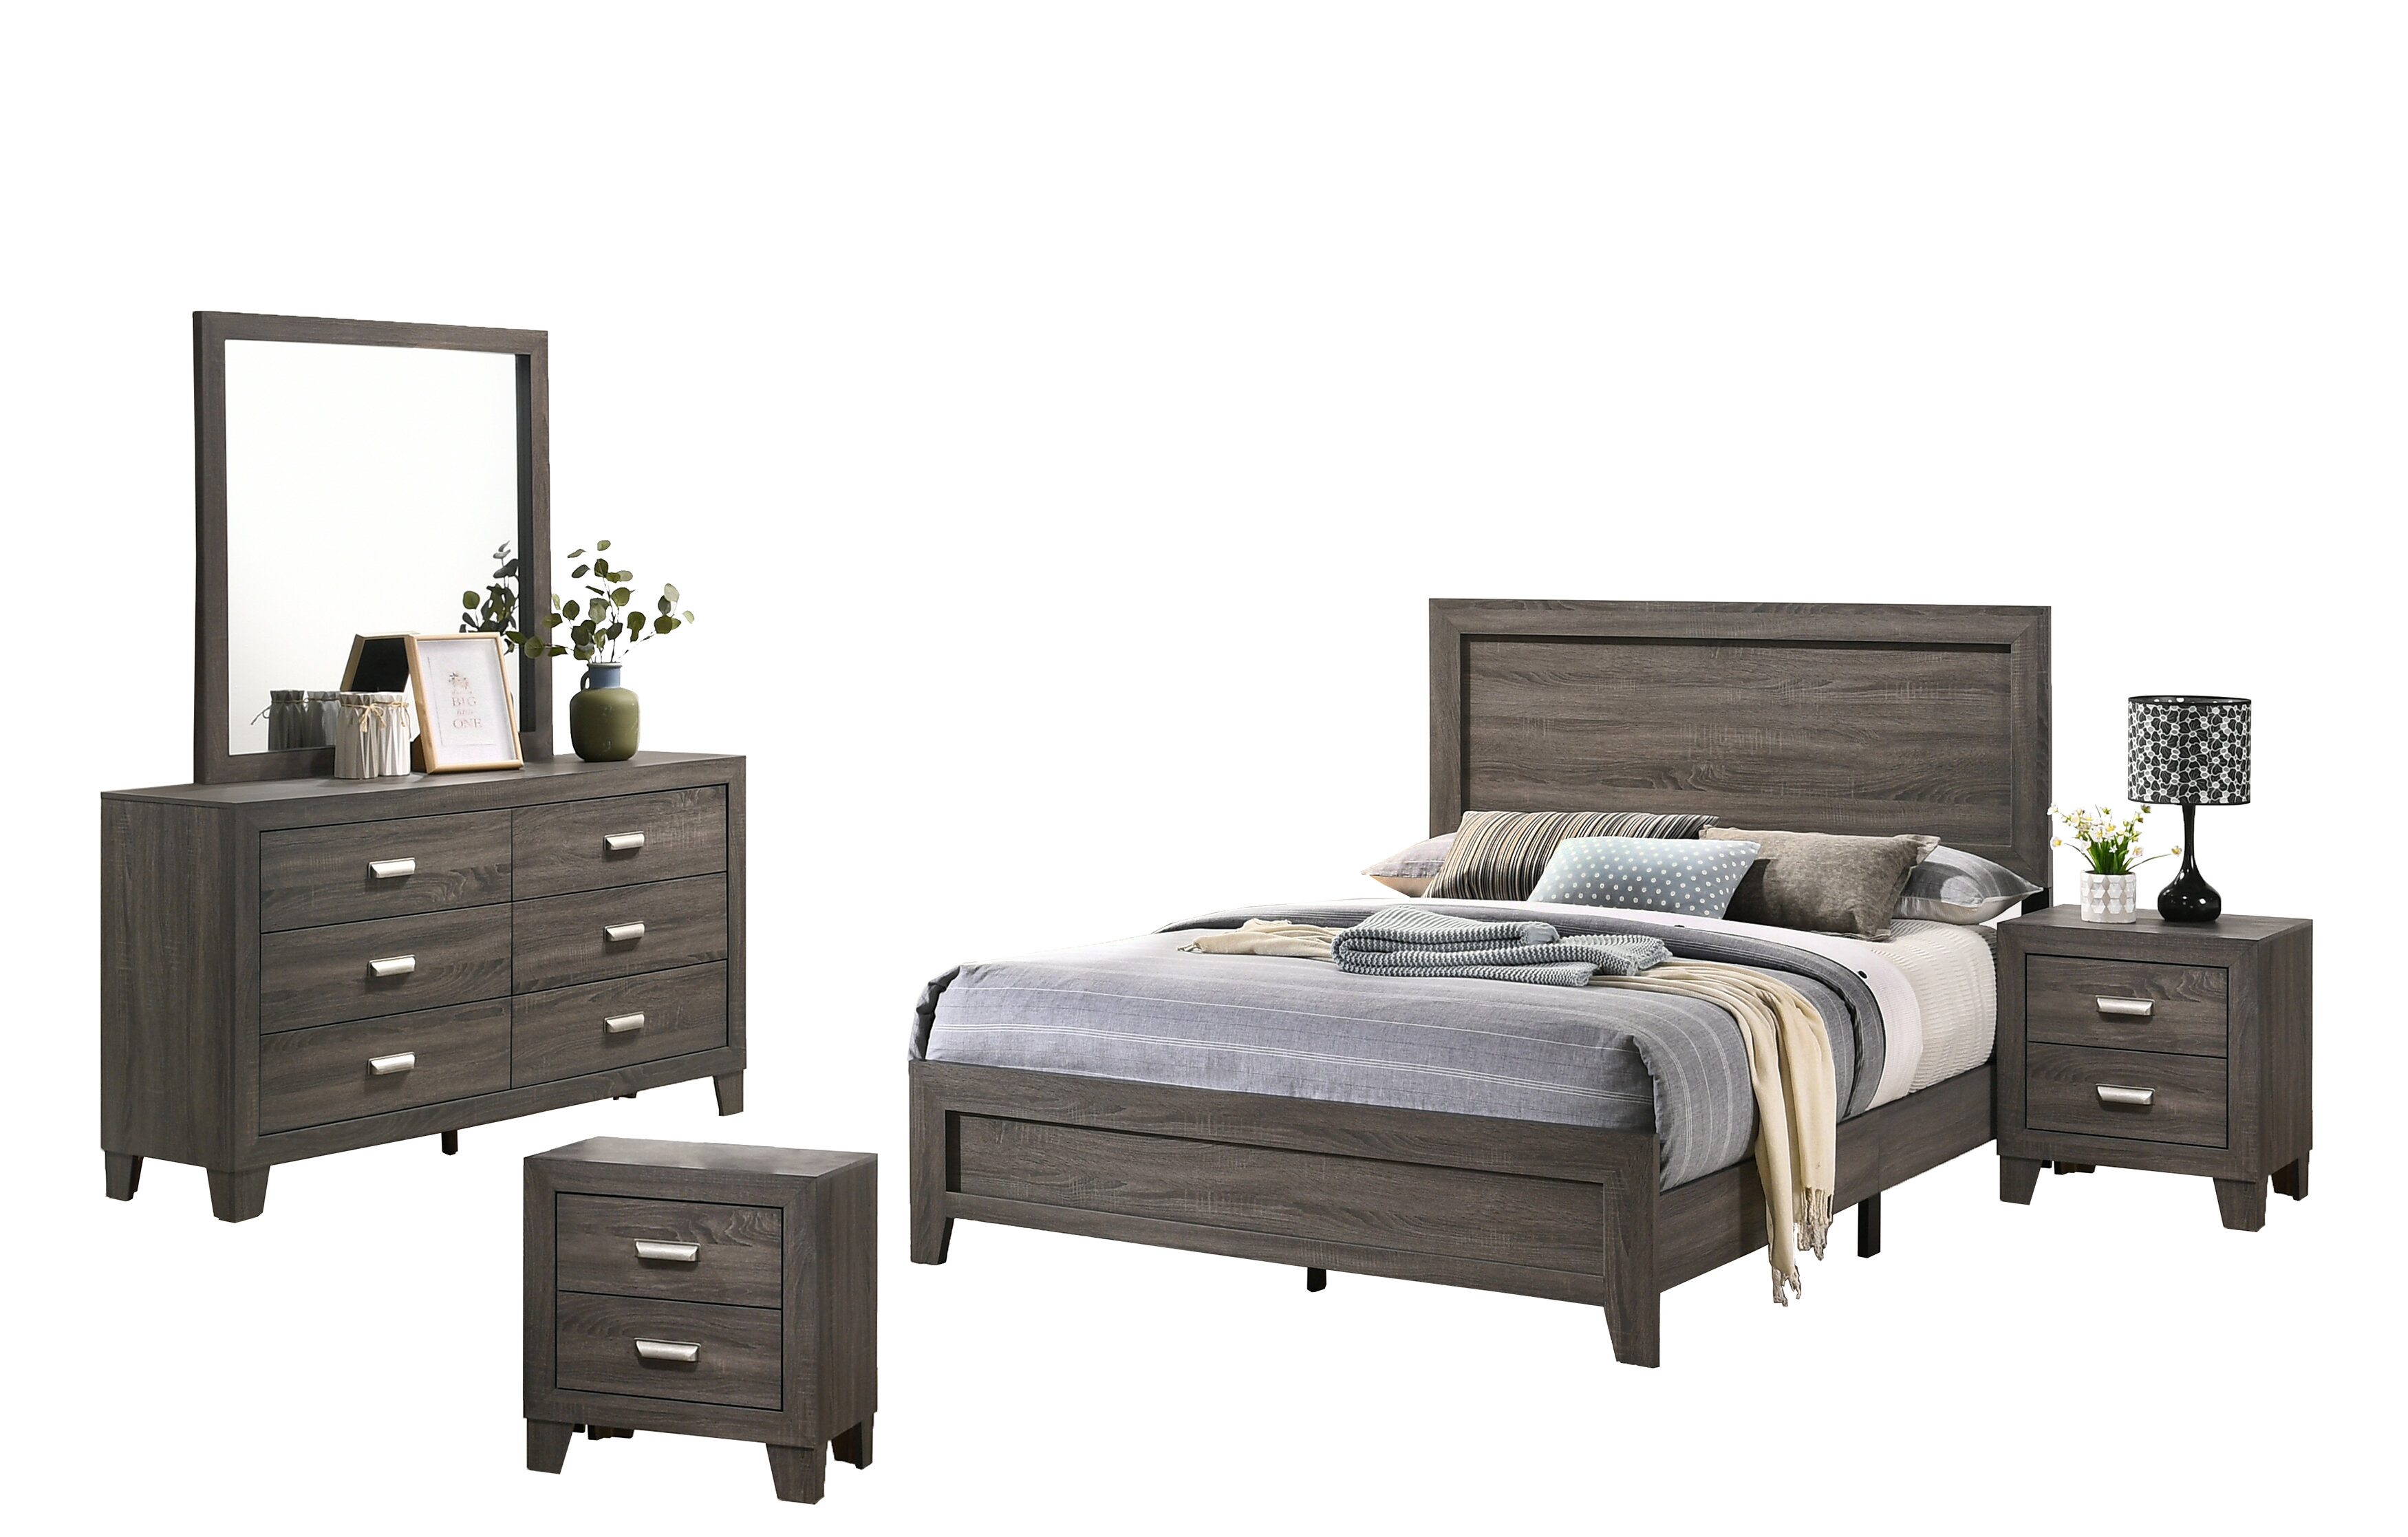 Rustic Bedroom Furniture Sets Free Shipping Over 35 Wayfair